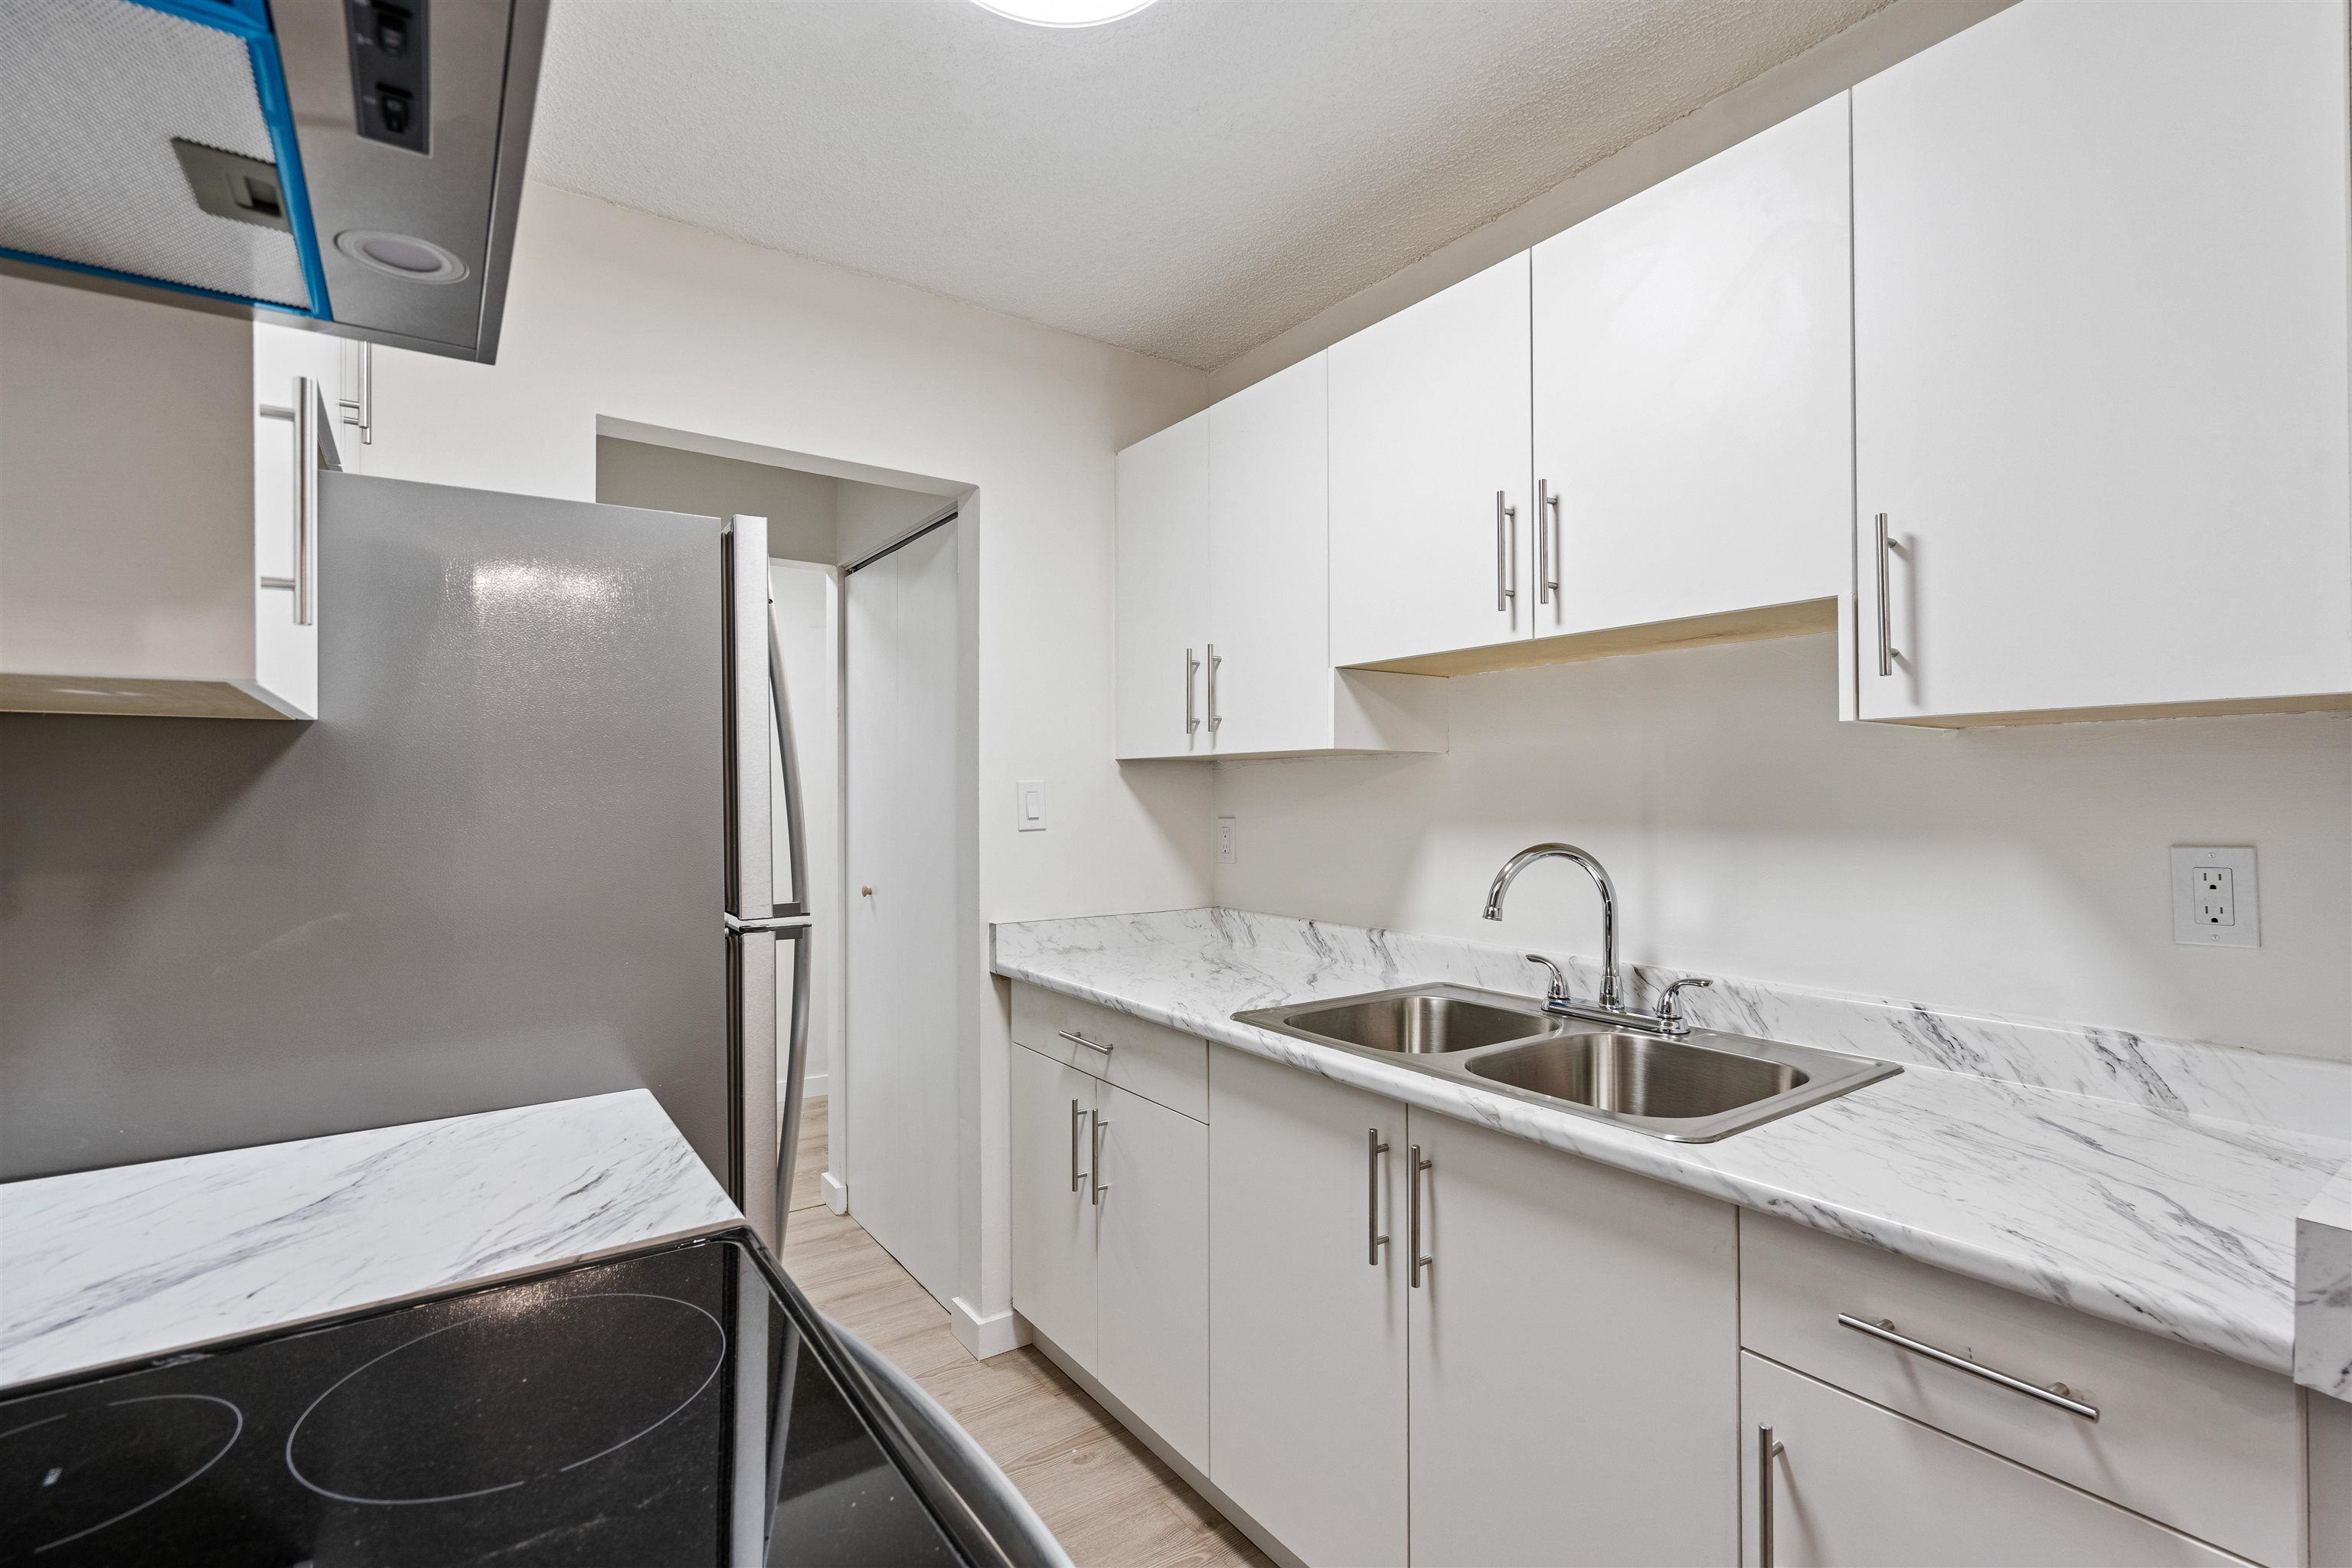 Michael Sung, 227-2600 E49TH AVENUE, Vancouver, British Columbia, 2 Bedrooms, 1 Bathroom, Residential Attached,For Sale ,R2838946